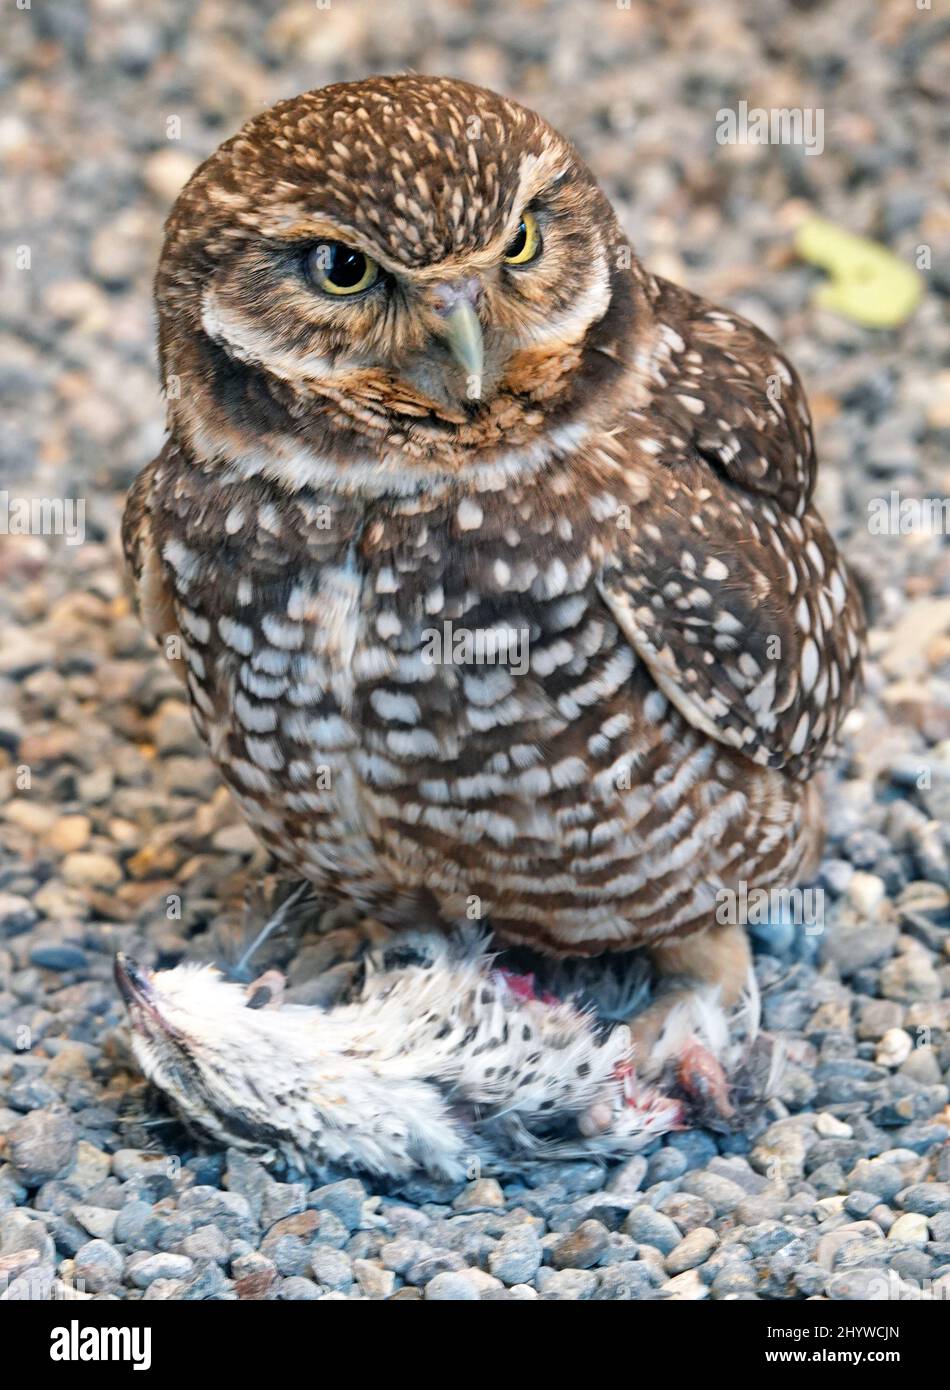 Portrait of a burrowing owl,  Athene cunicularia ,  a small, ground owl inhabiting many of the western states in the United States. Stock Photo